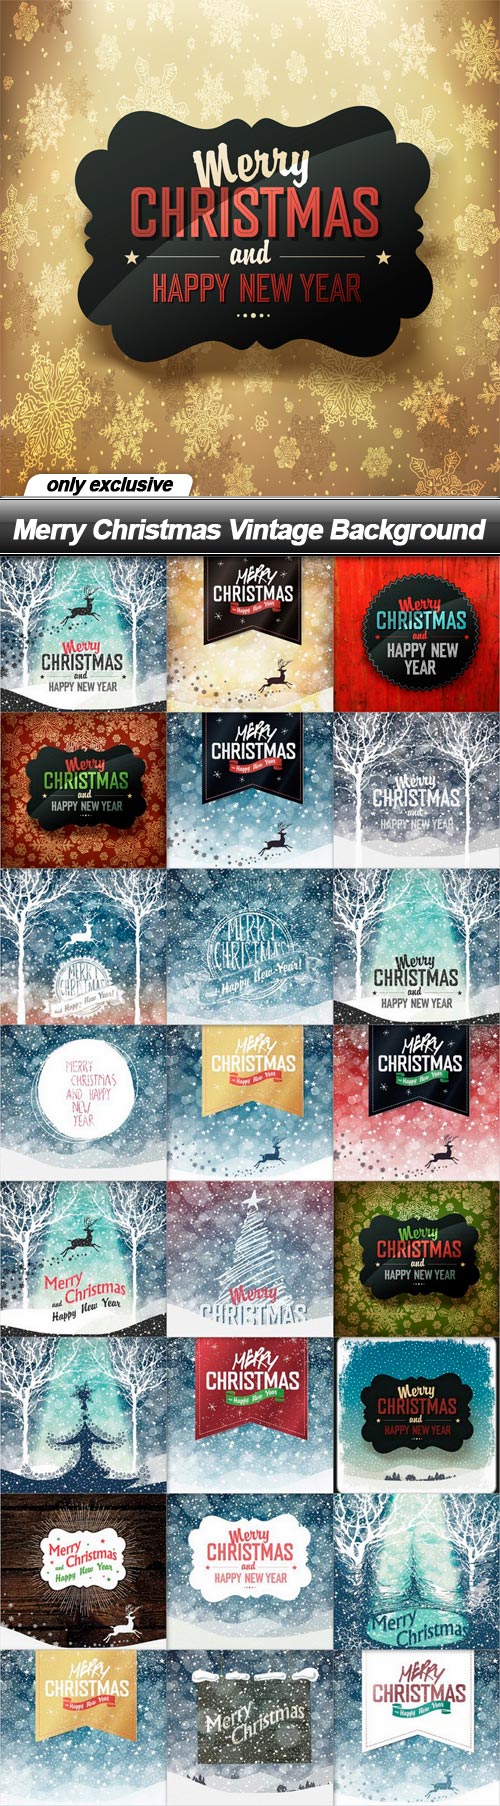 Merry Christmas Vintage Background - 25 EPS